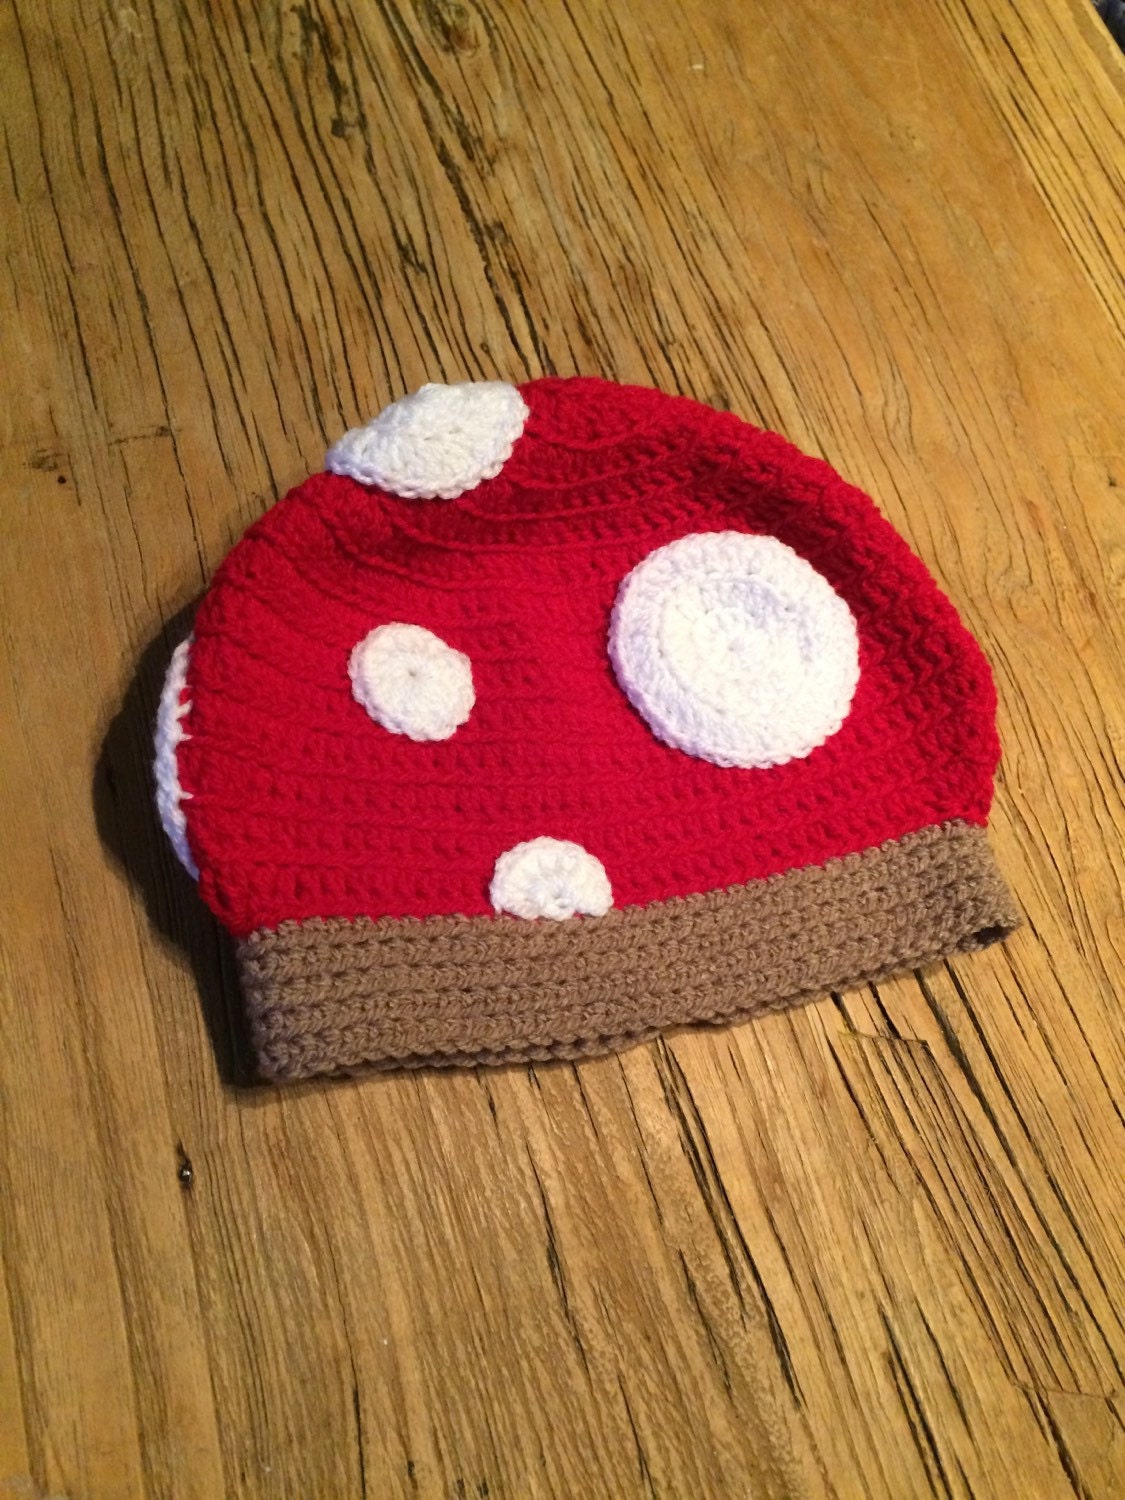 Toadstool childrens hat crocheted in soft wool. Classic red